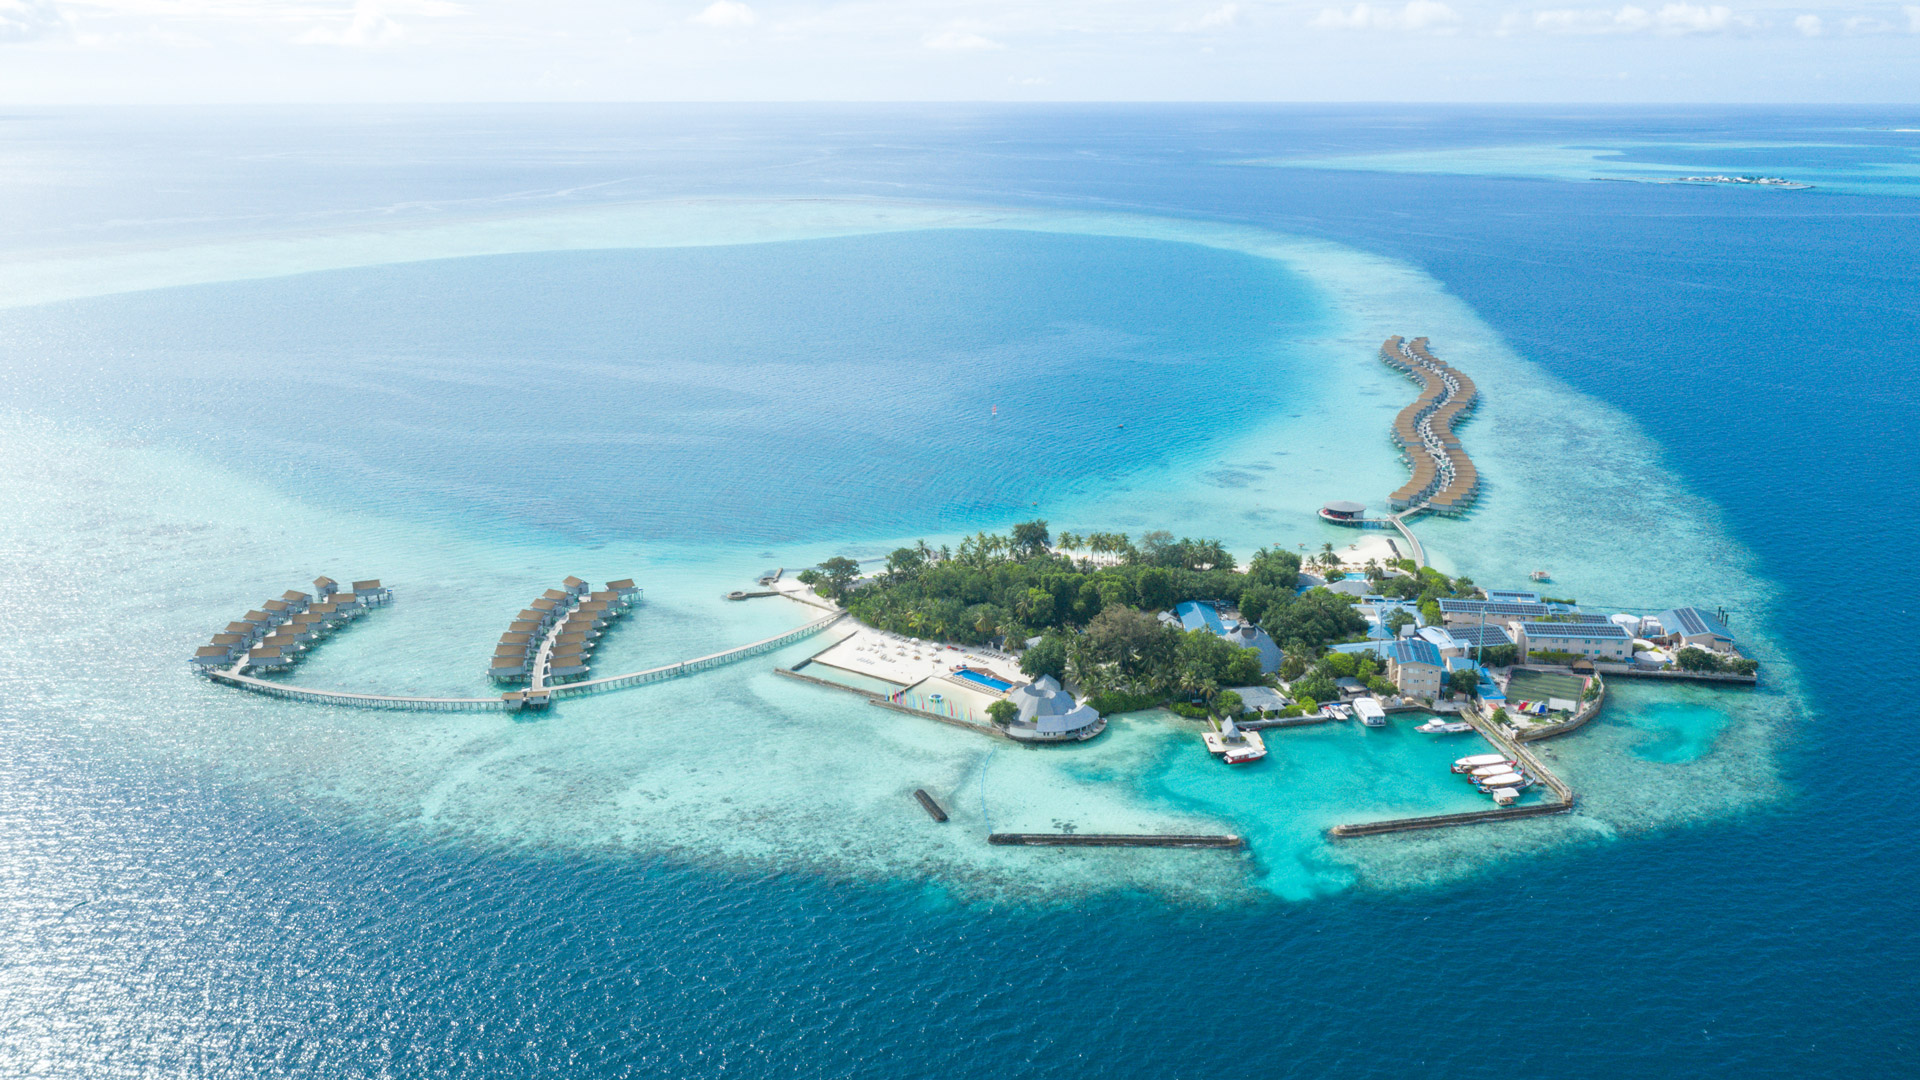 Aerial of a Swimsol rooftop PV system at Centara Ras Fushi island resort in the Maldives